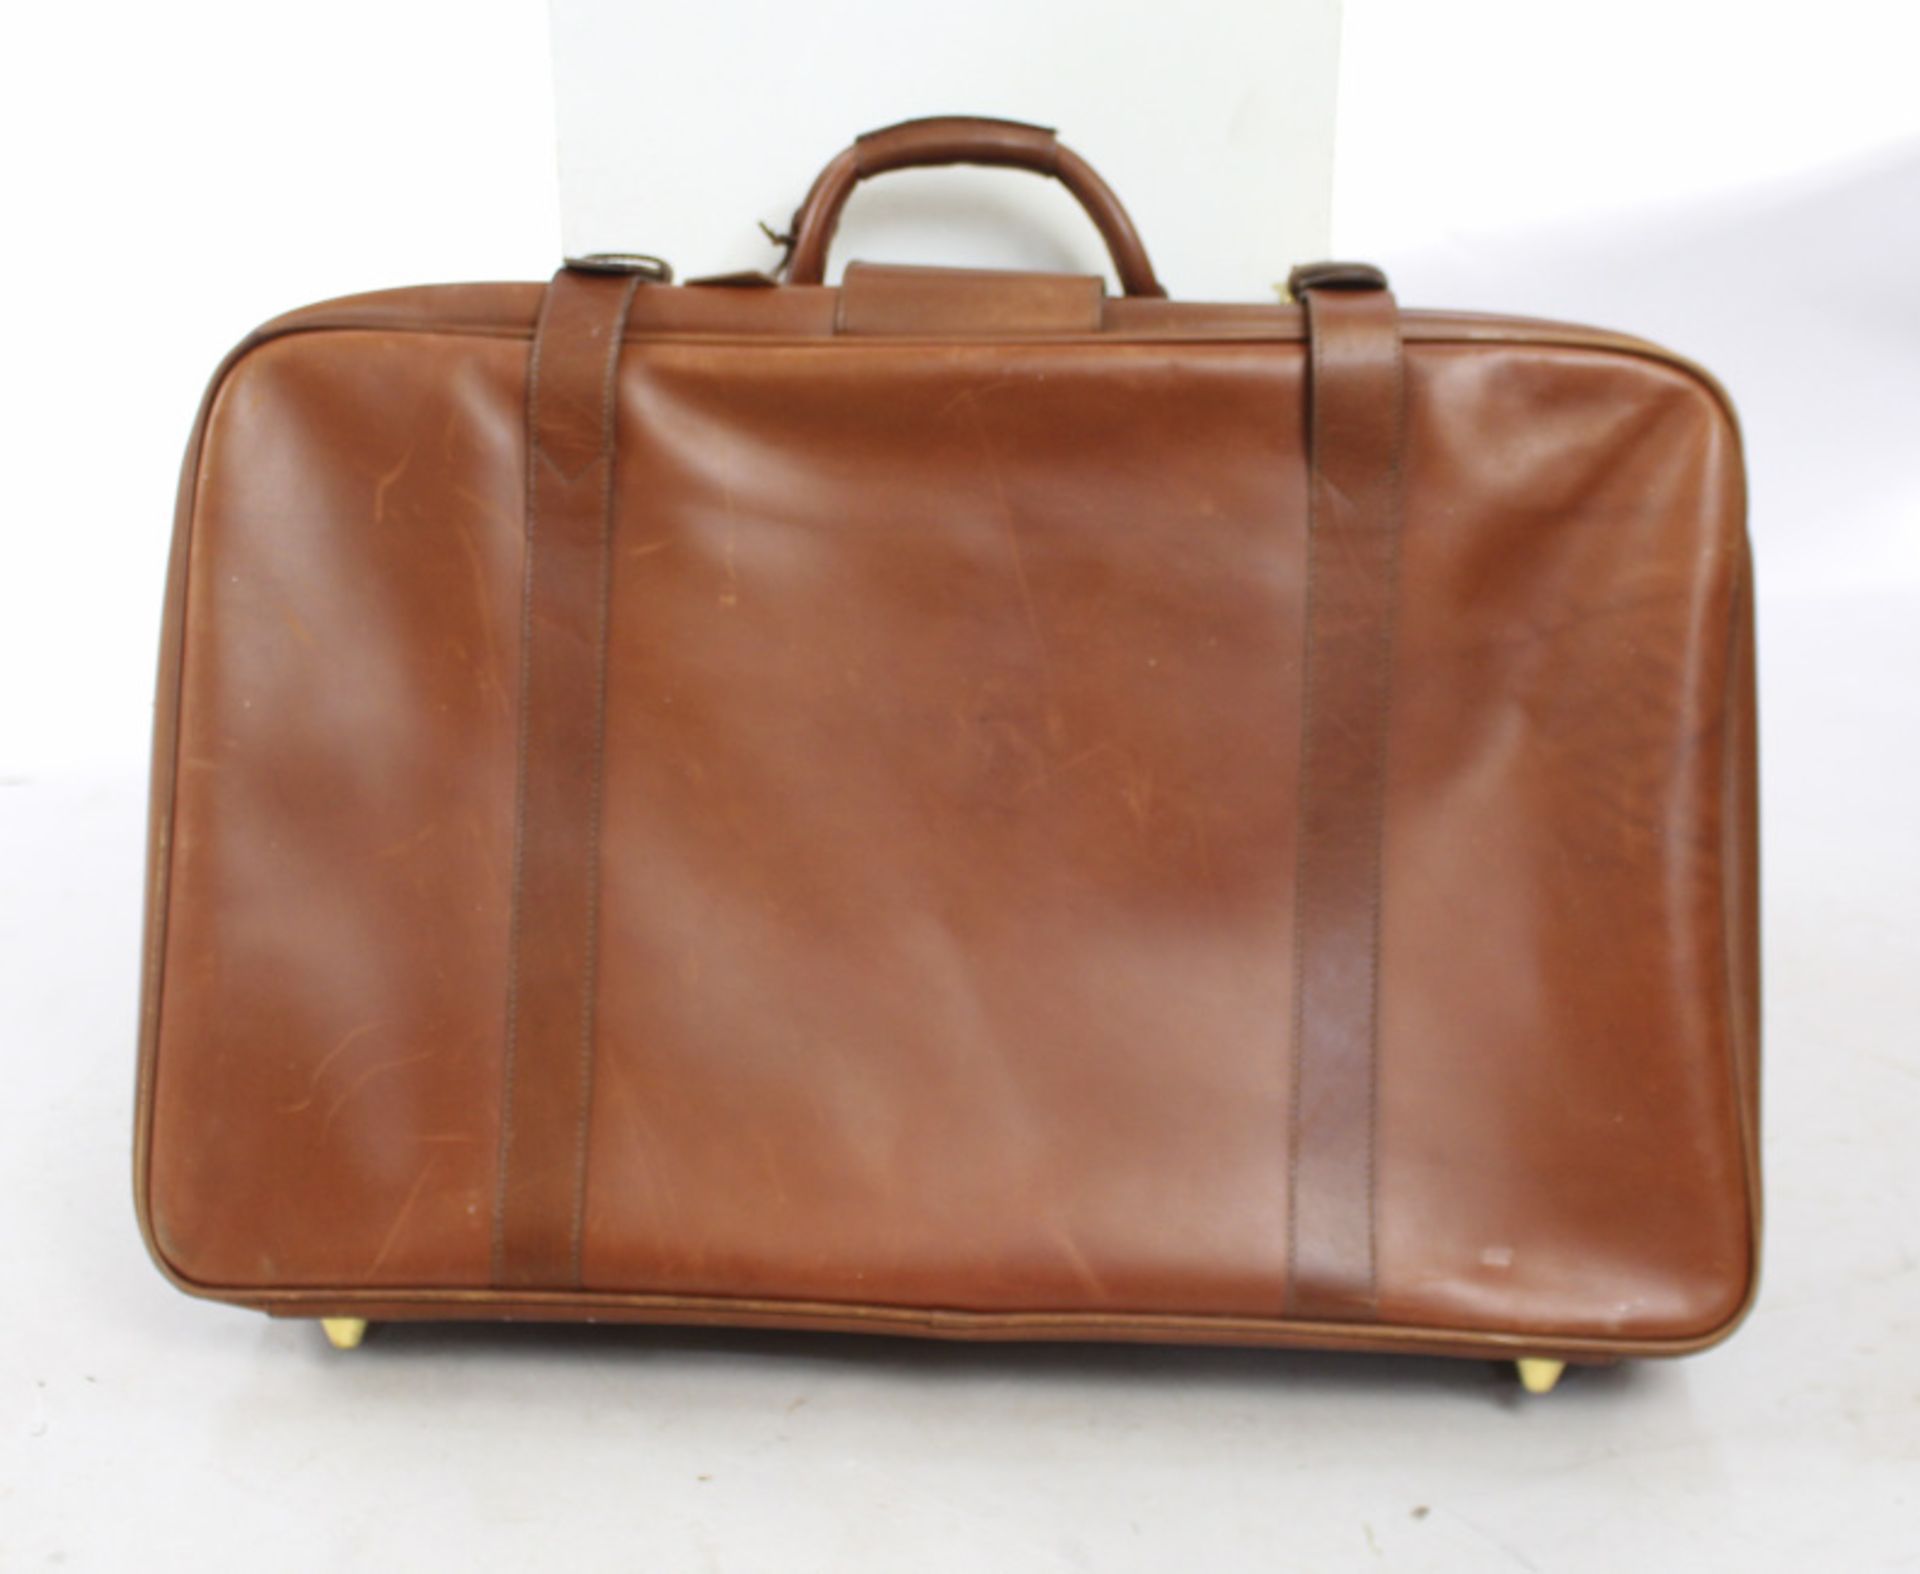 Allied Dunbar Tan Leather Luggage Case - Image 2 of 5